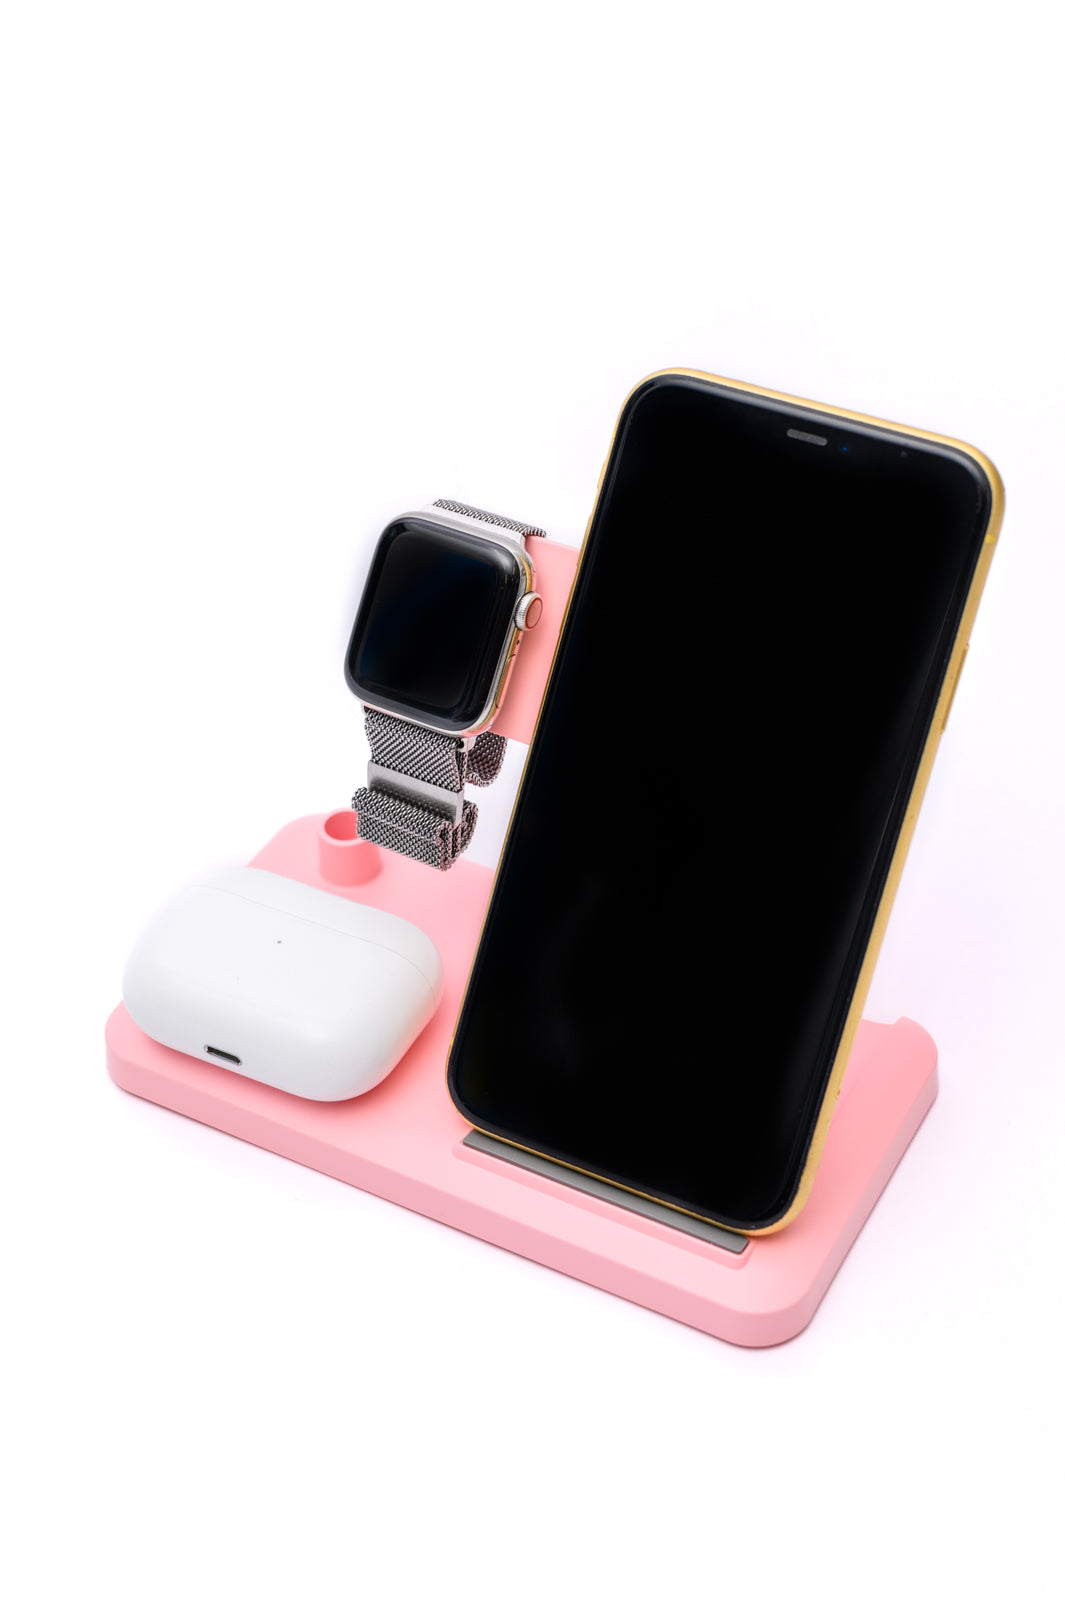 Creative Space Wireless Charger in Pink-Womens-OS-AllyKat Boutique Shop for Women & Kids